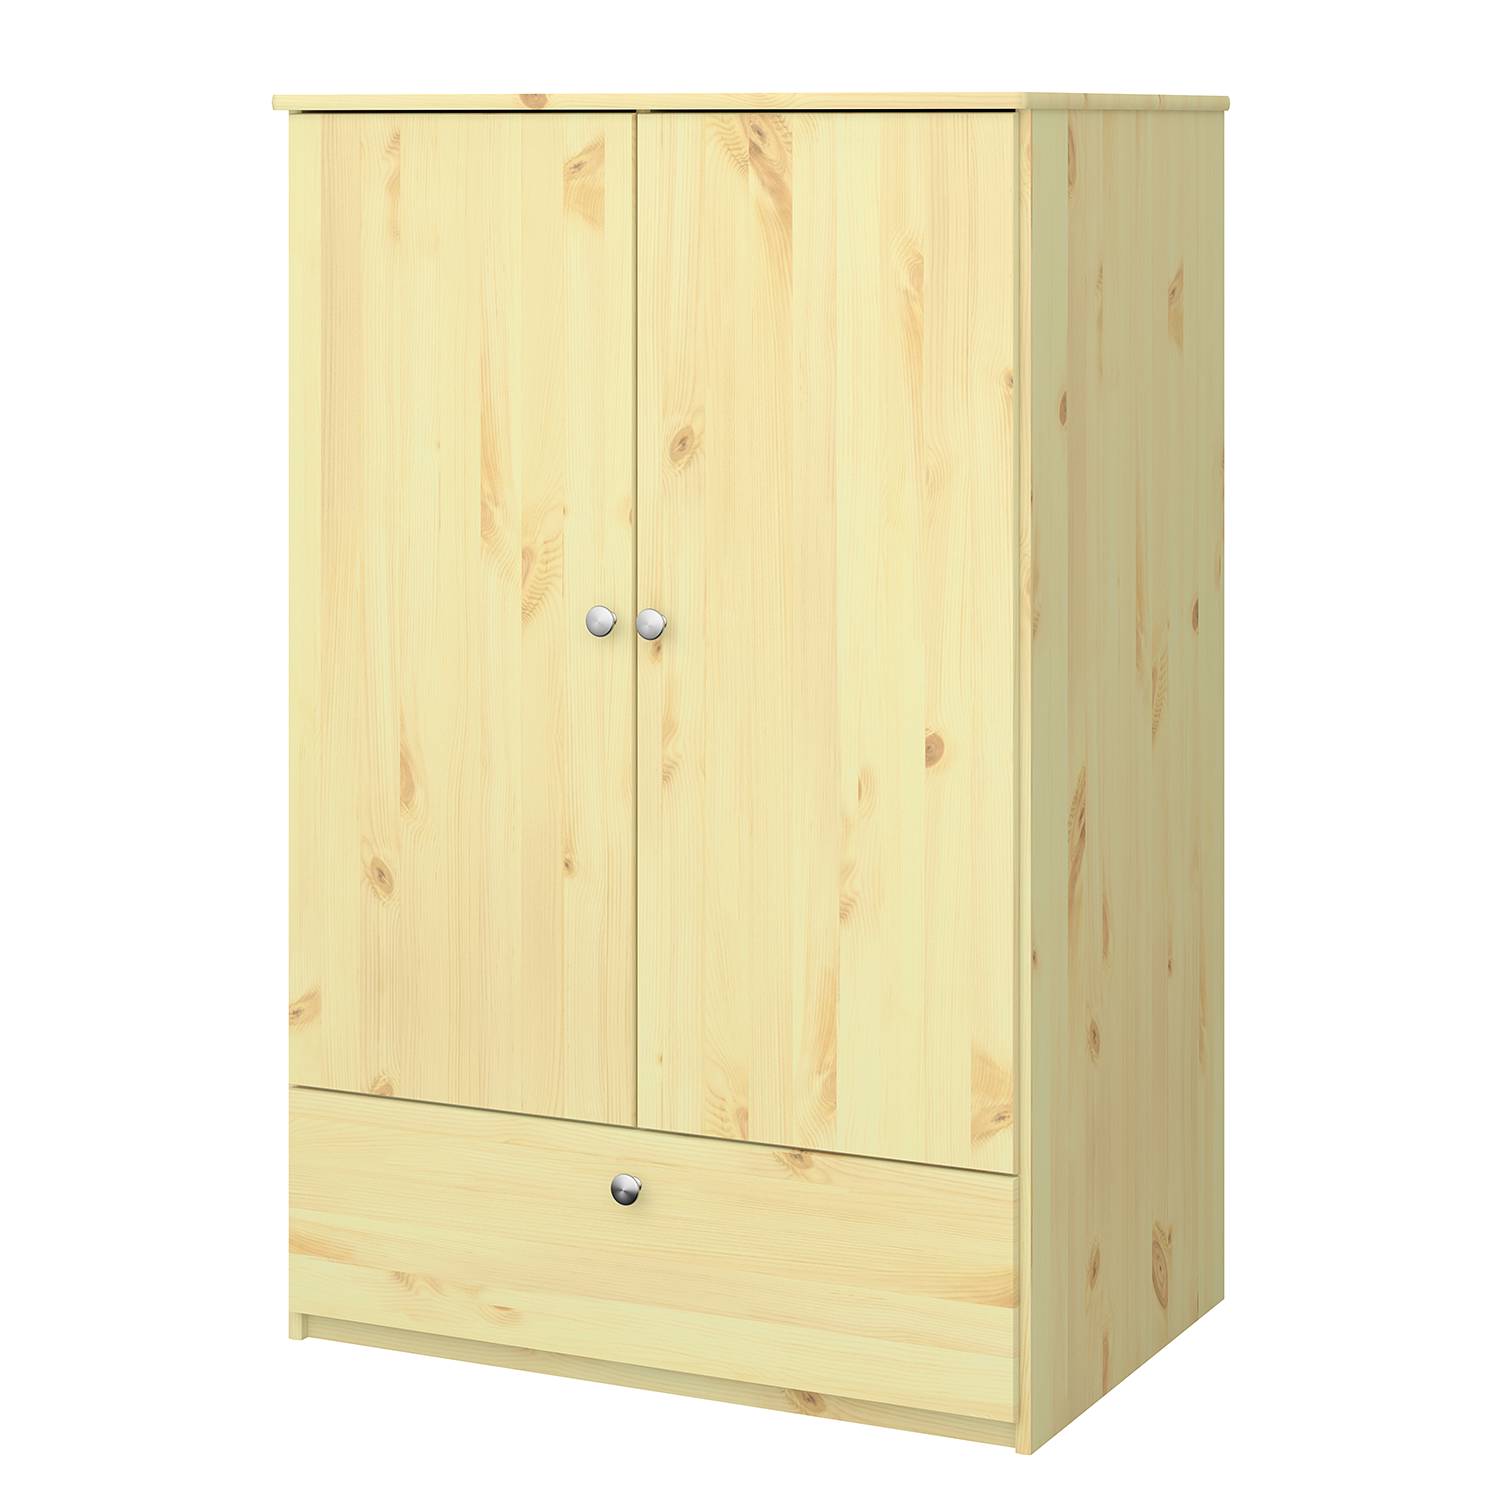 Image of Armoire Memphis 000000001000227554